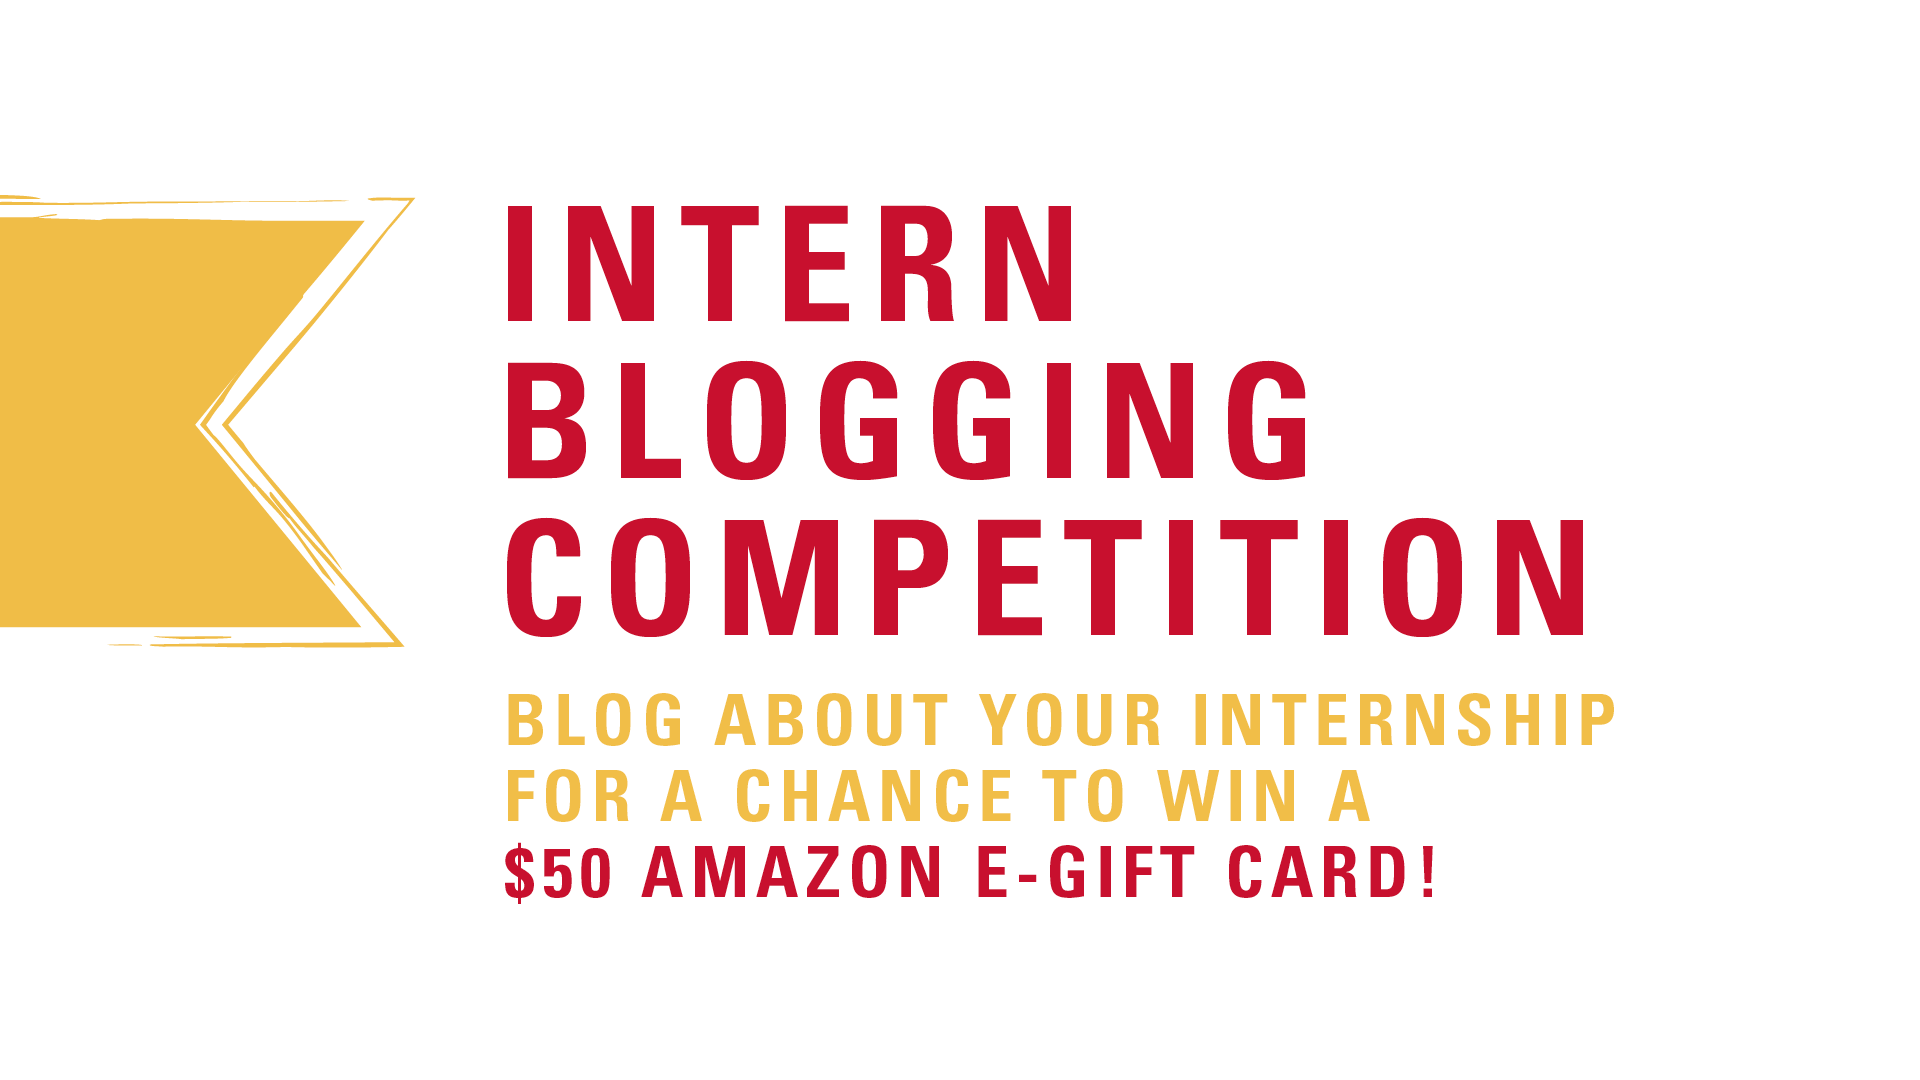 Intern Blogging Competition: Blog about your internship for a chance to win a $50 Amazon E-Gift Card